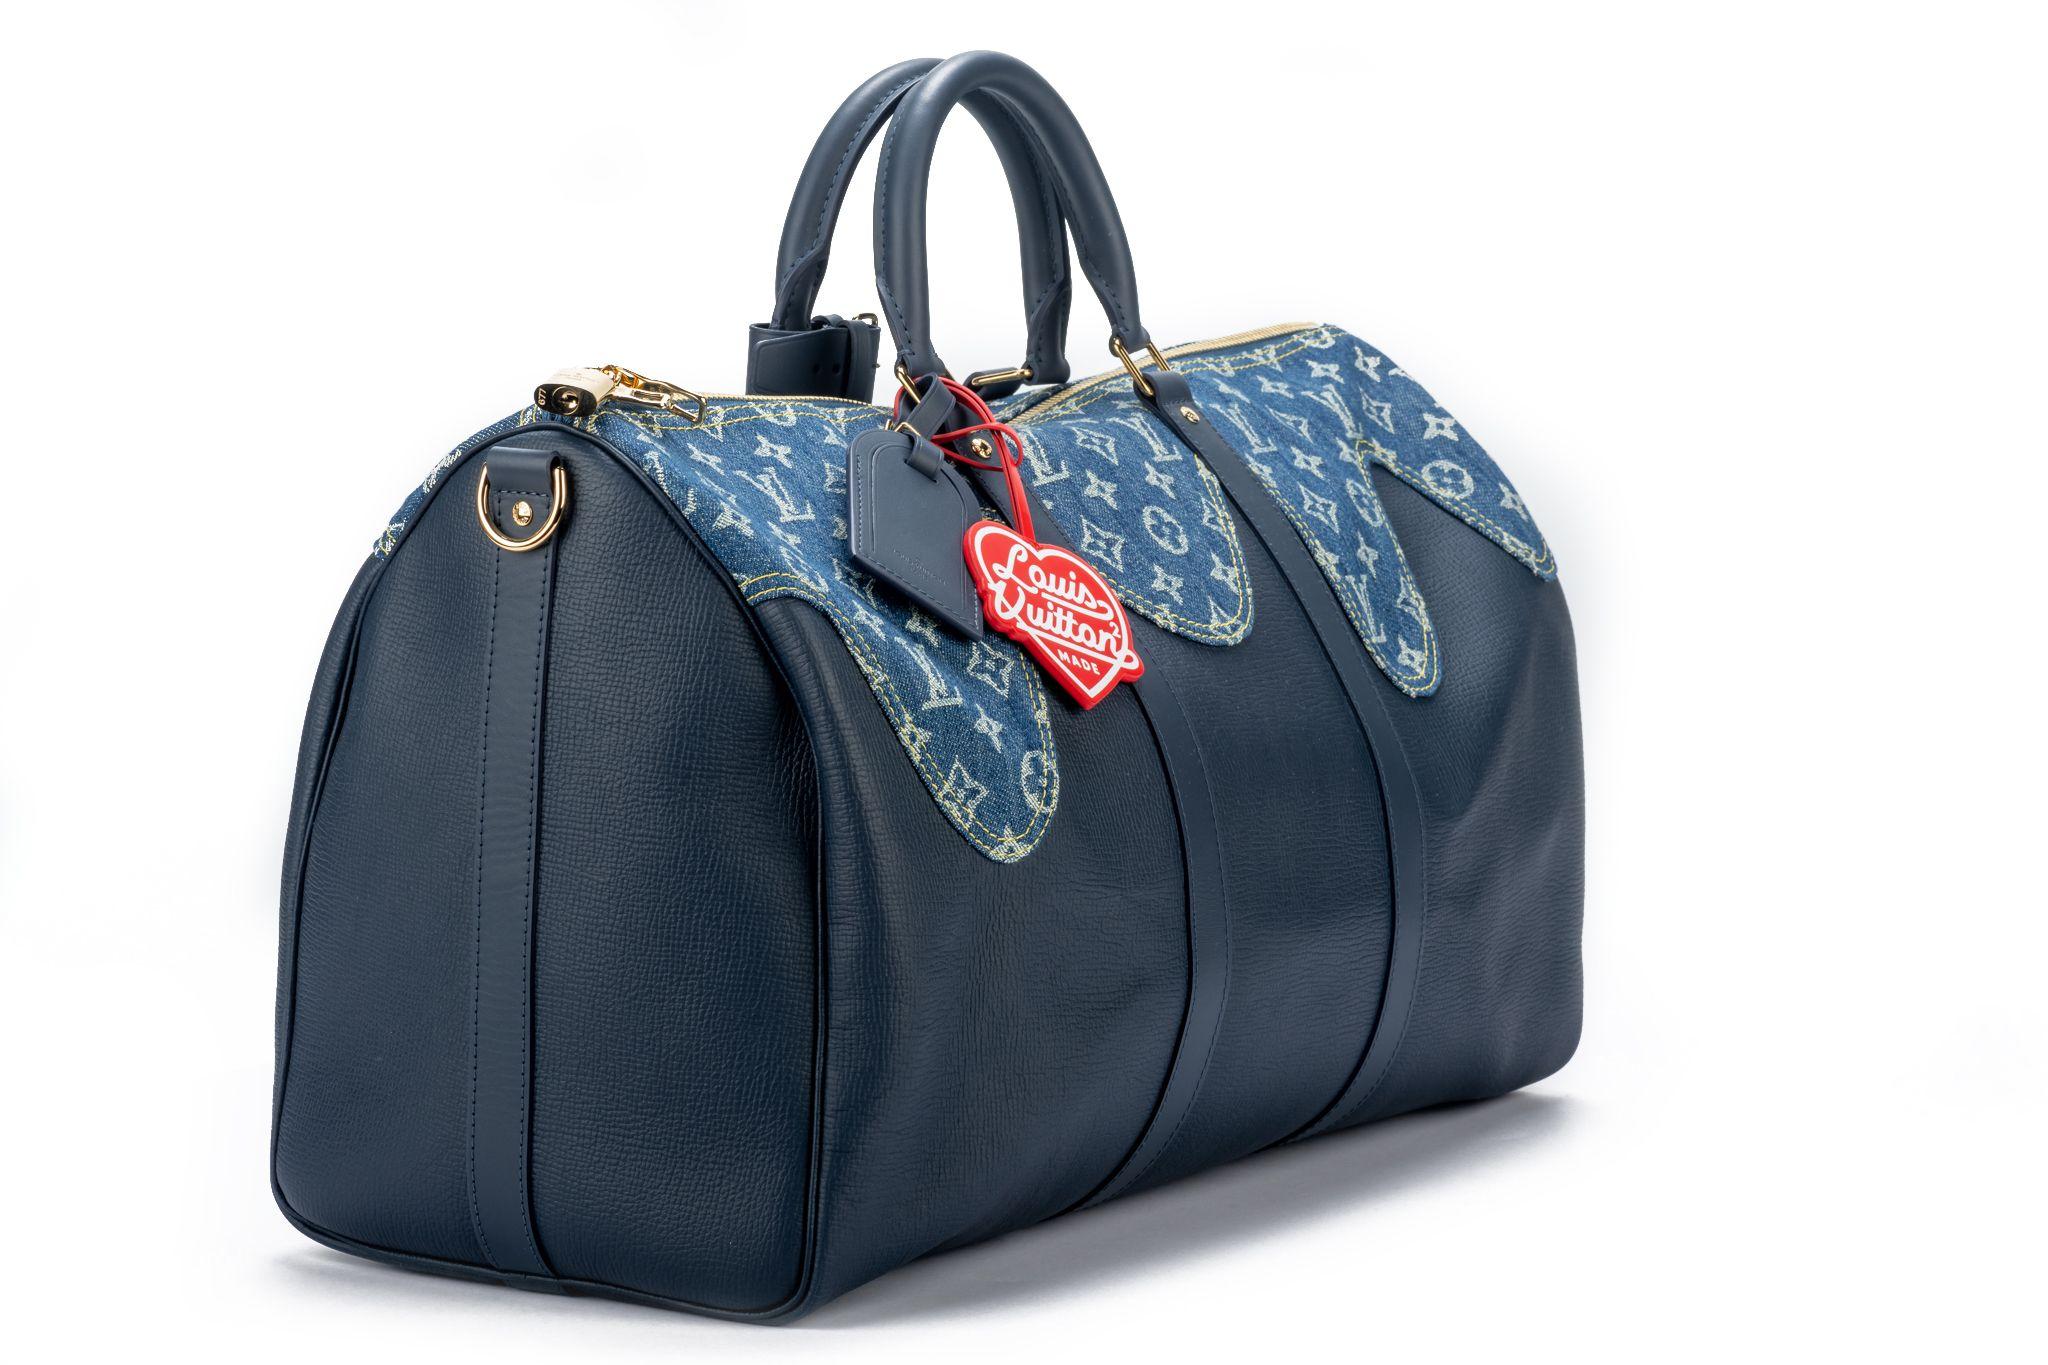 Limited Edition Louis Vuitton x NIGO Blue Monogram Denim Drip & Taurillon Keepall Bandoulière 50 with gold hardware from 2021.This bag is lined with blue textile material. The bag was featured during the pre-spring 2022 collaboration with Japanese